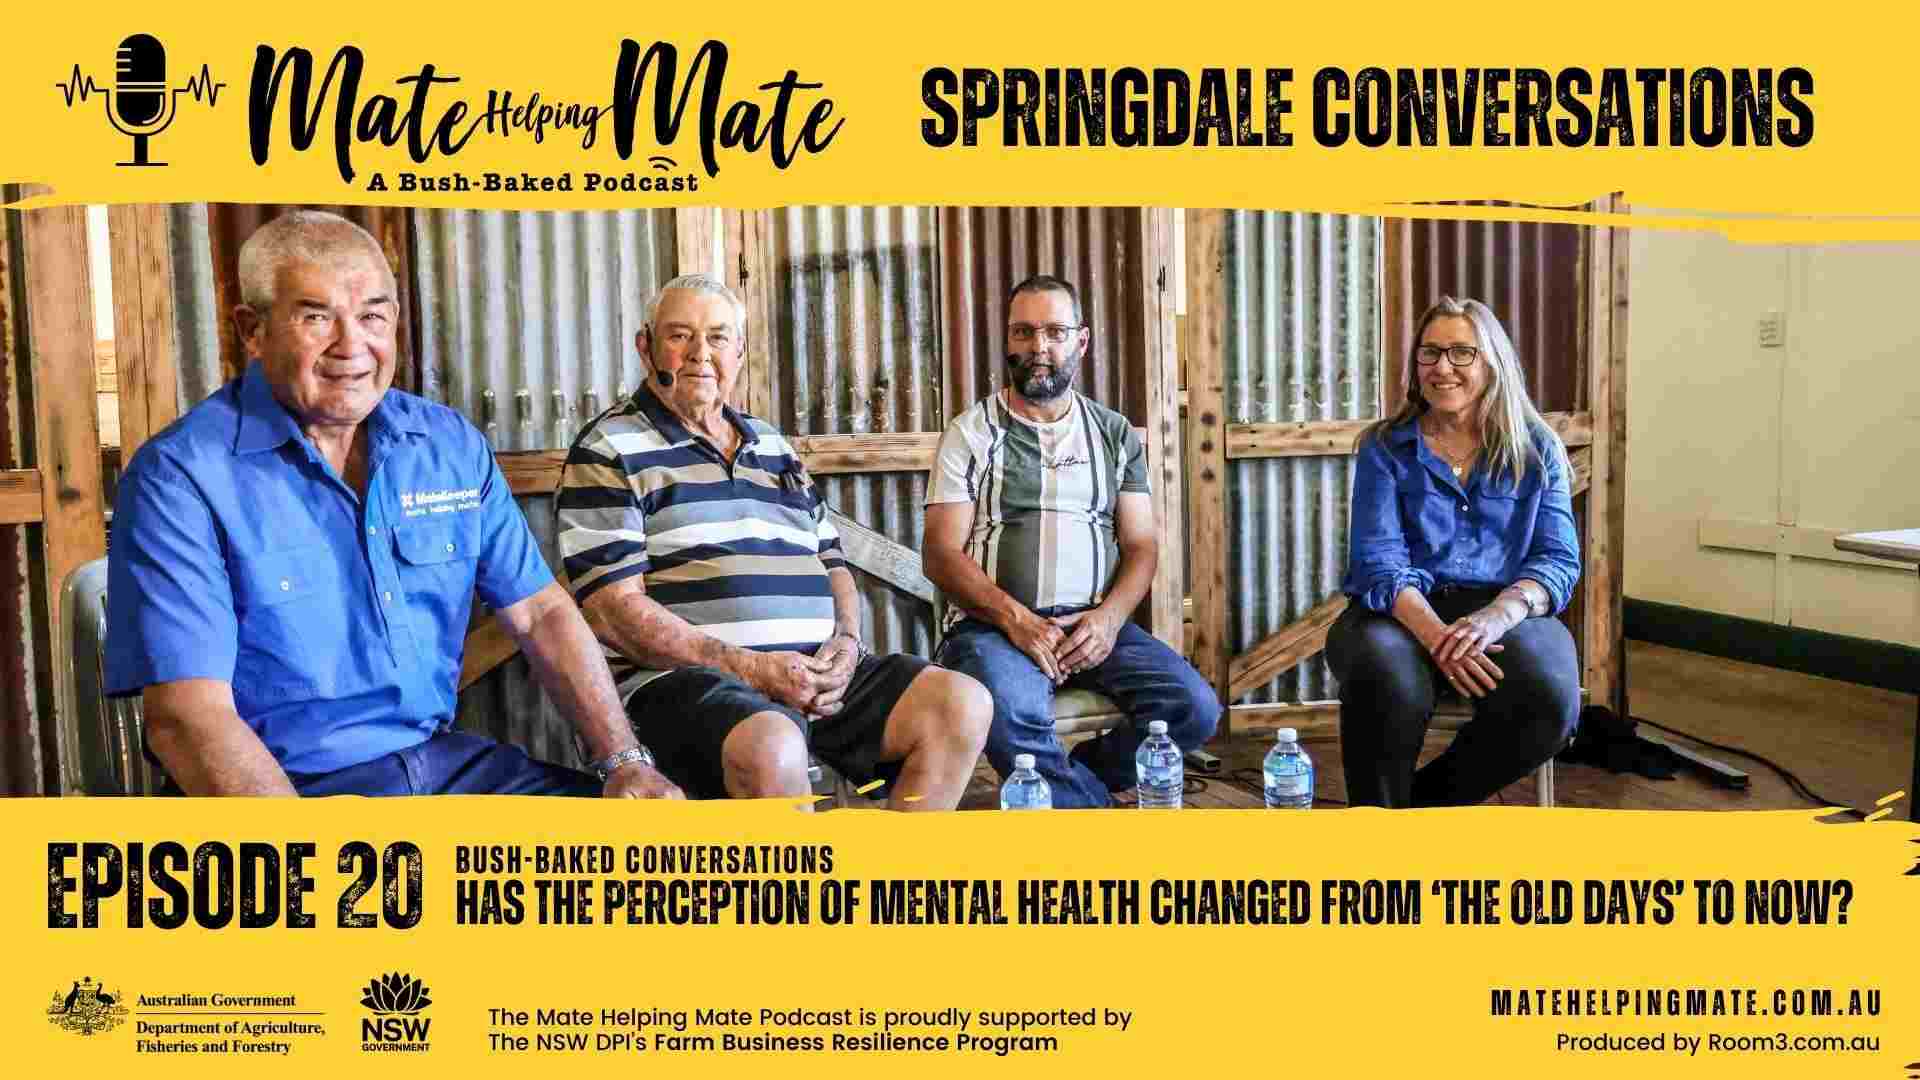 Bush-Baked Conversations - Has the perception of mental health changed from 'the old days' to now?